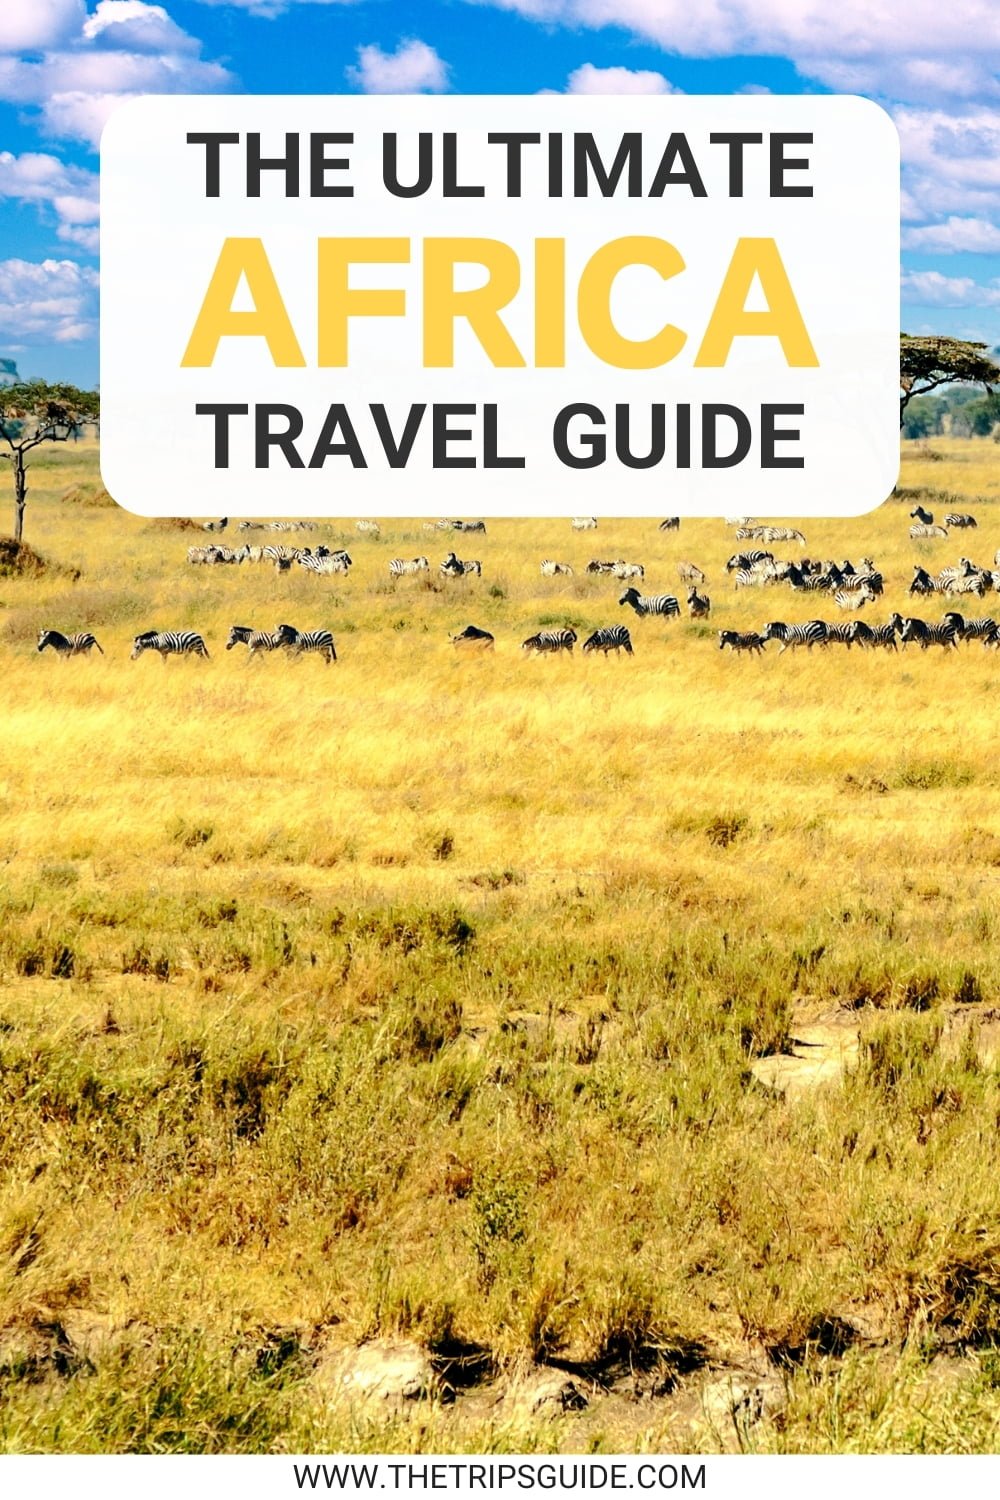 Africa travel guide